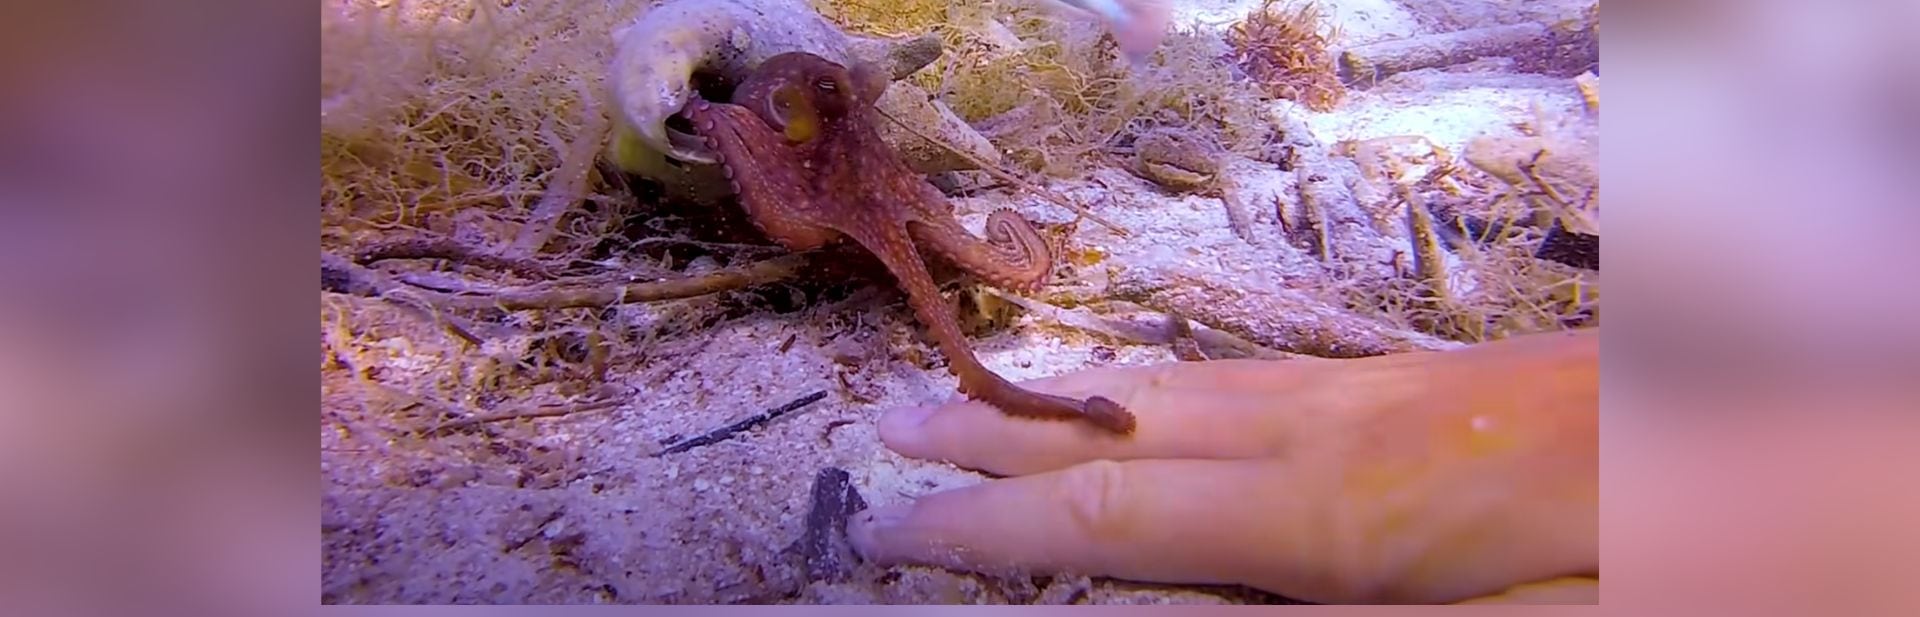 Tiny Octopus Bravely Approaches Human And Sparks An Unlikely Friendship